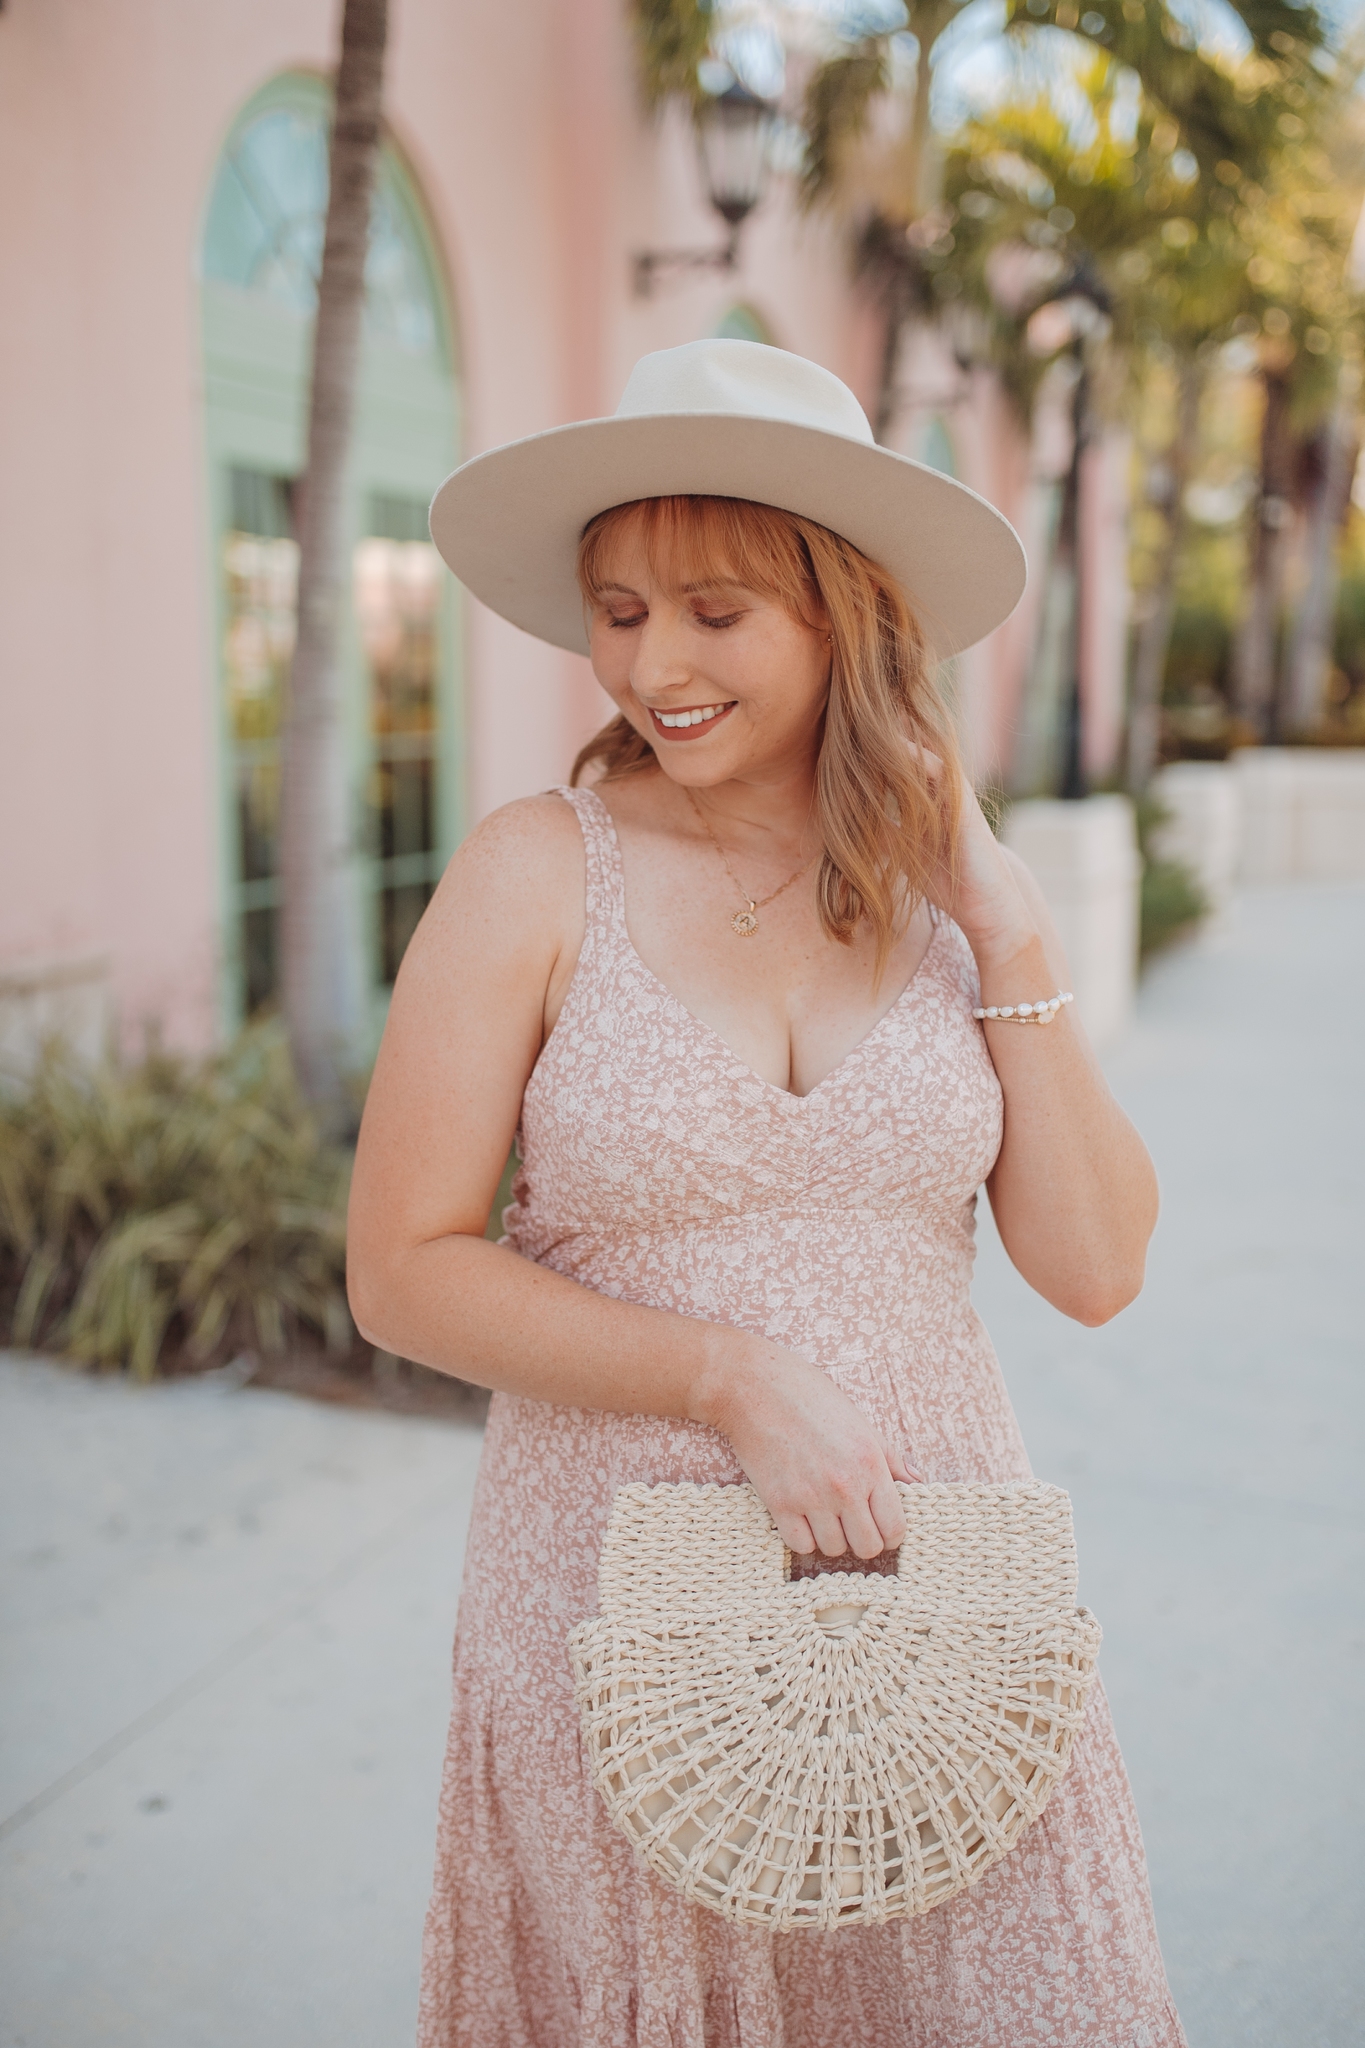 Cute summer outfit idea with maxi dress